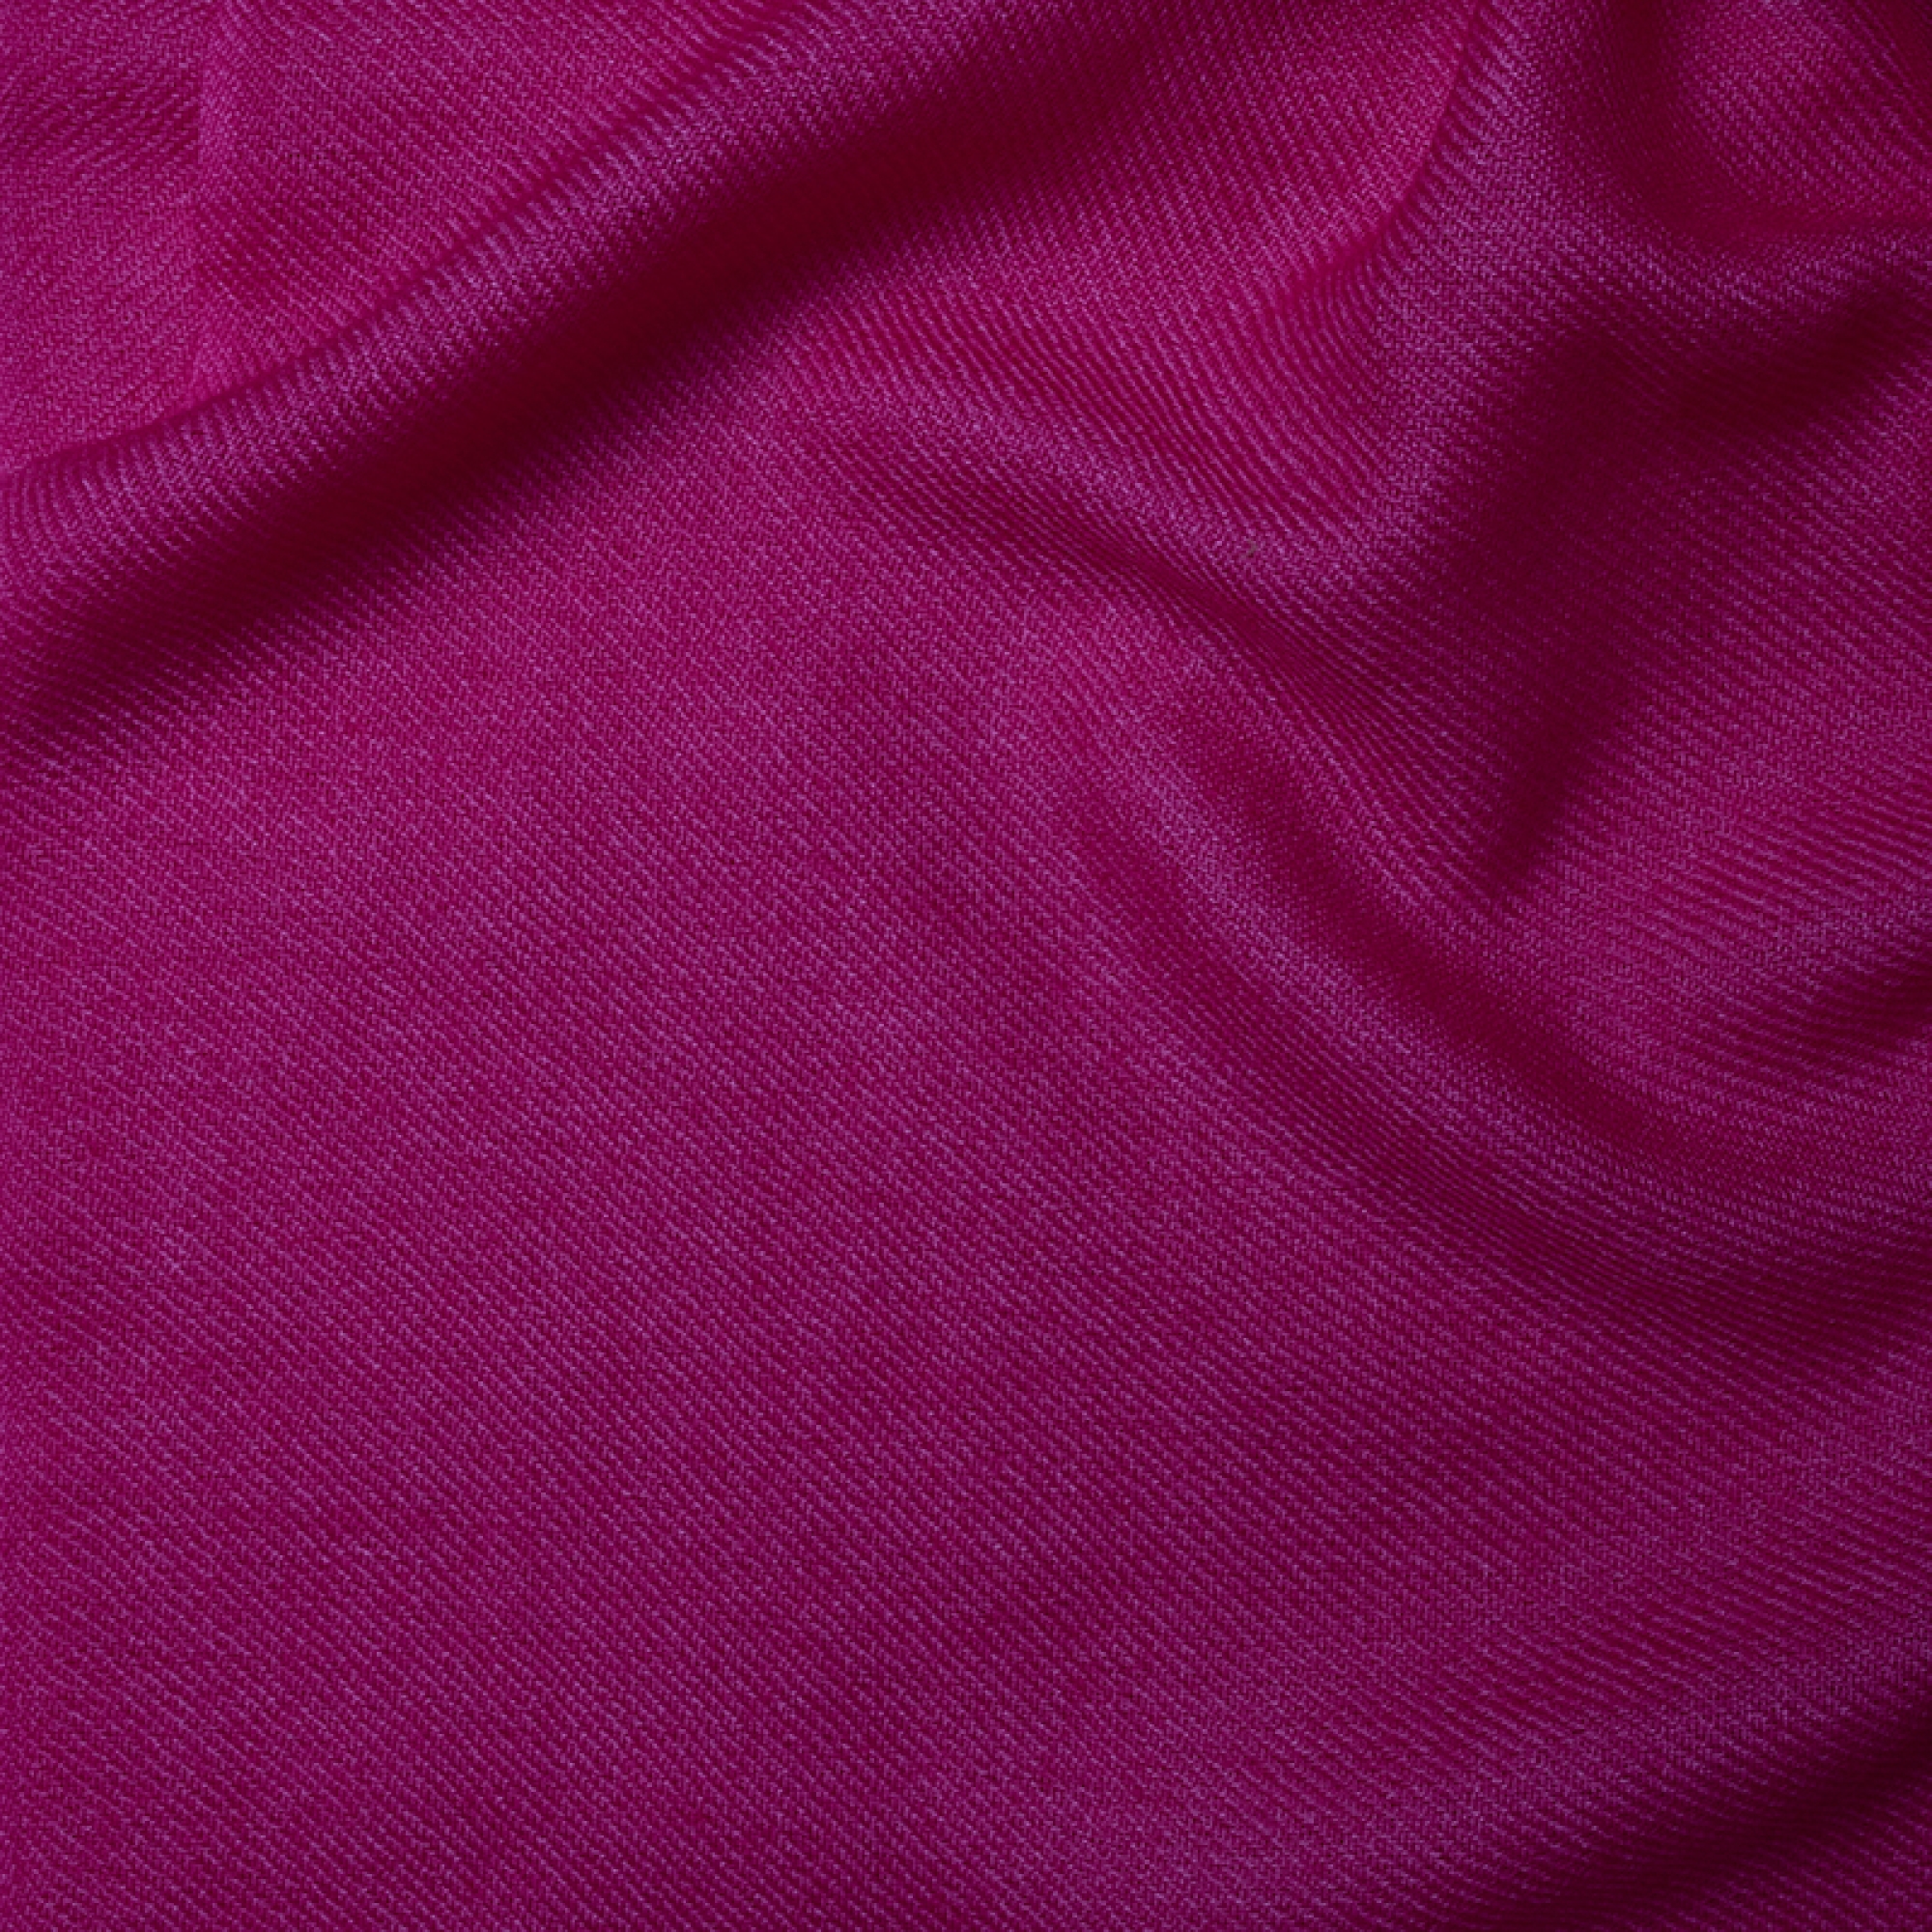 Cashmere accessories cocooning toodoo plain xl 240 x 260 flashing pink 240 x 260 cm